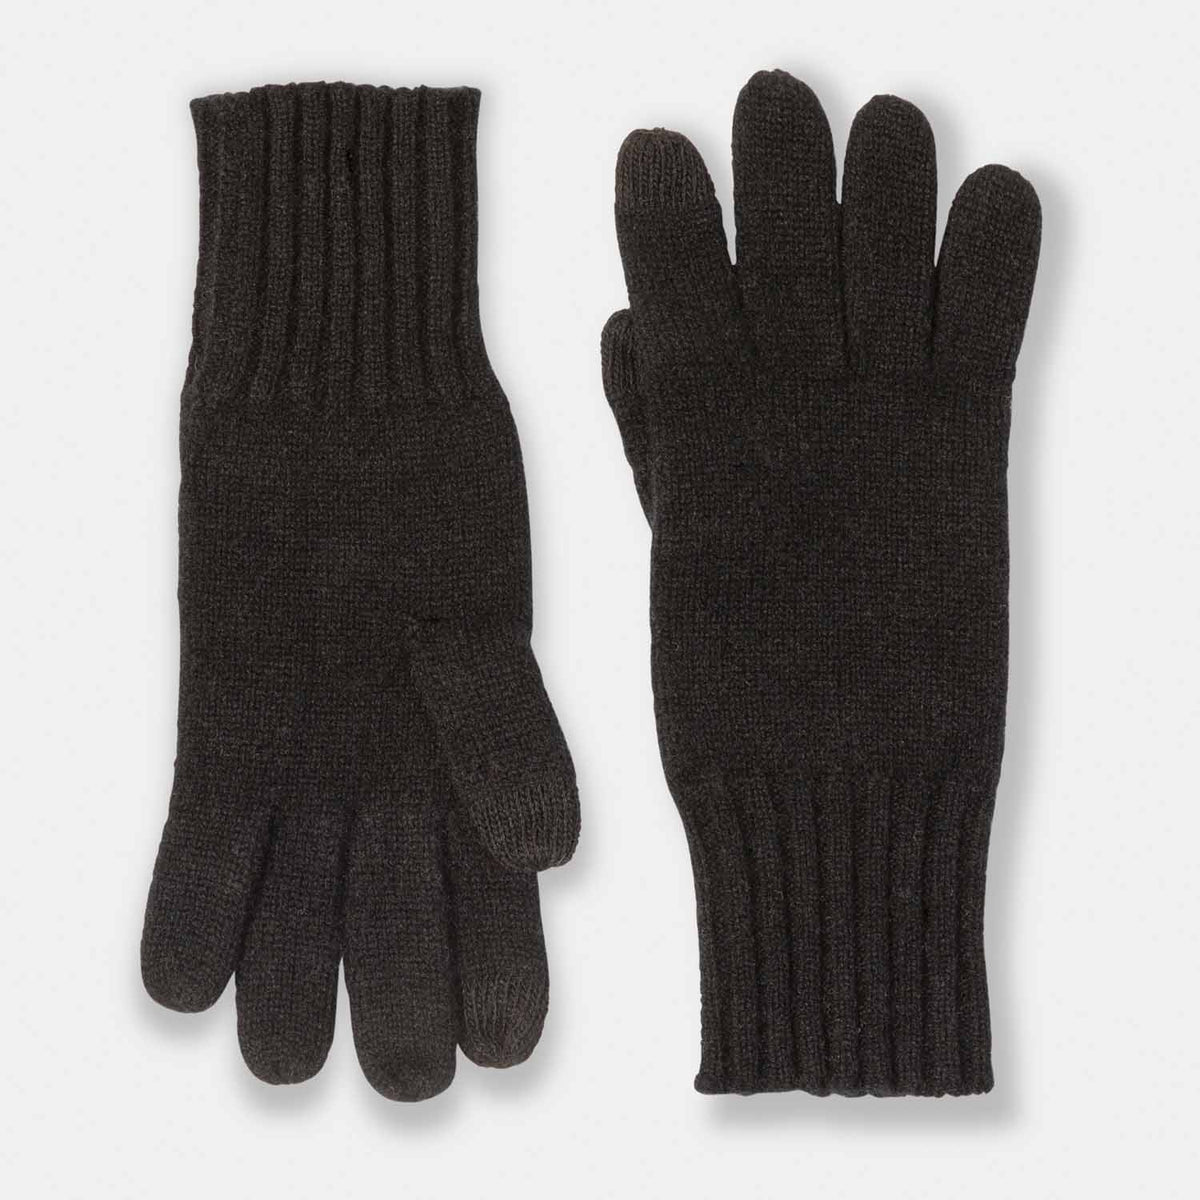 Picture of knit cashmere gloves with touch tech finger tips and rib cuff, black.